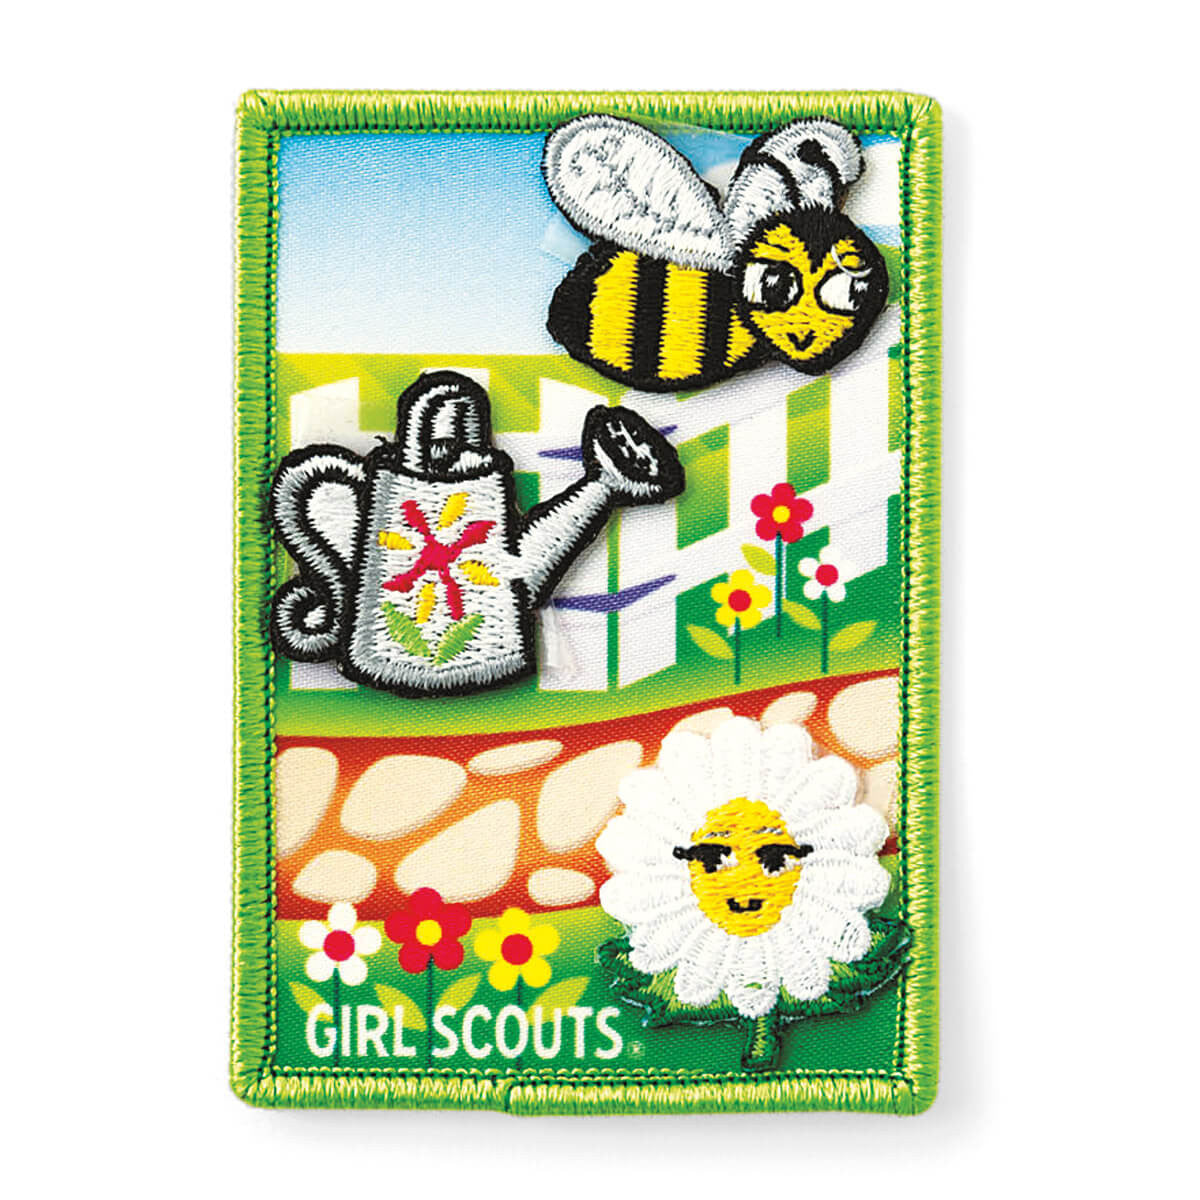 Girl Scouts Welcome To The Daisy Flower Garden Daisy Journey Award Set - Basics Clothing Store